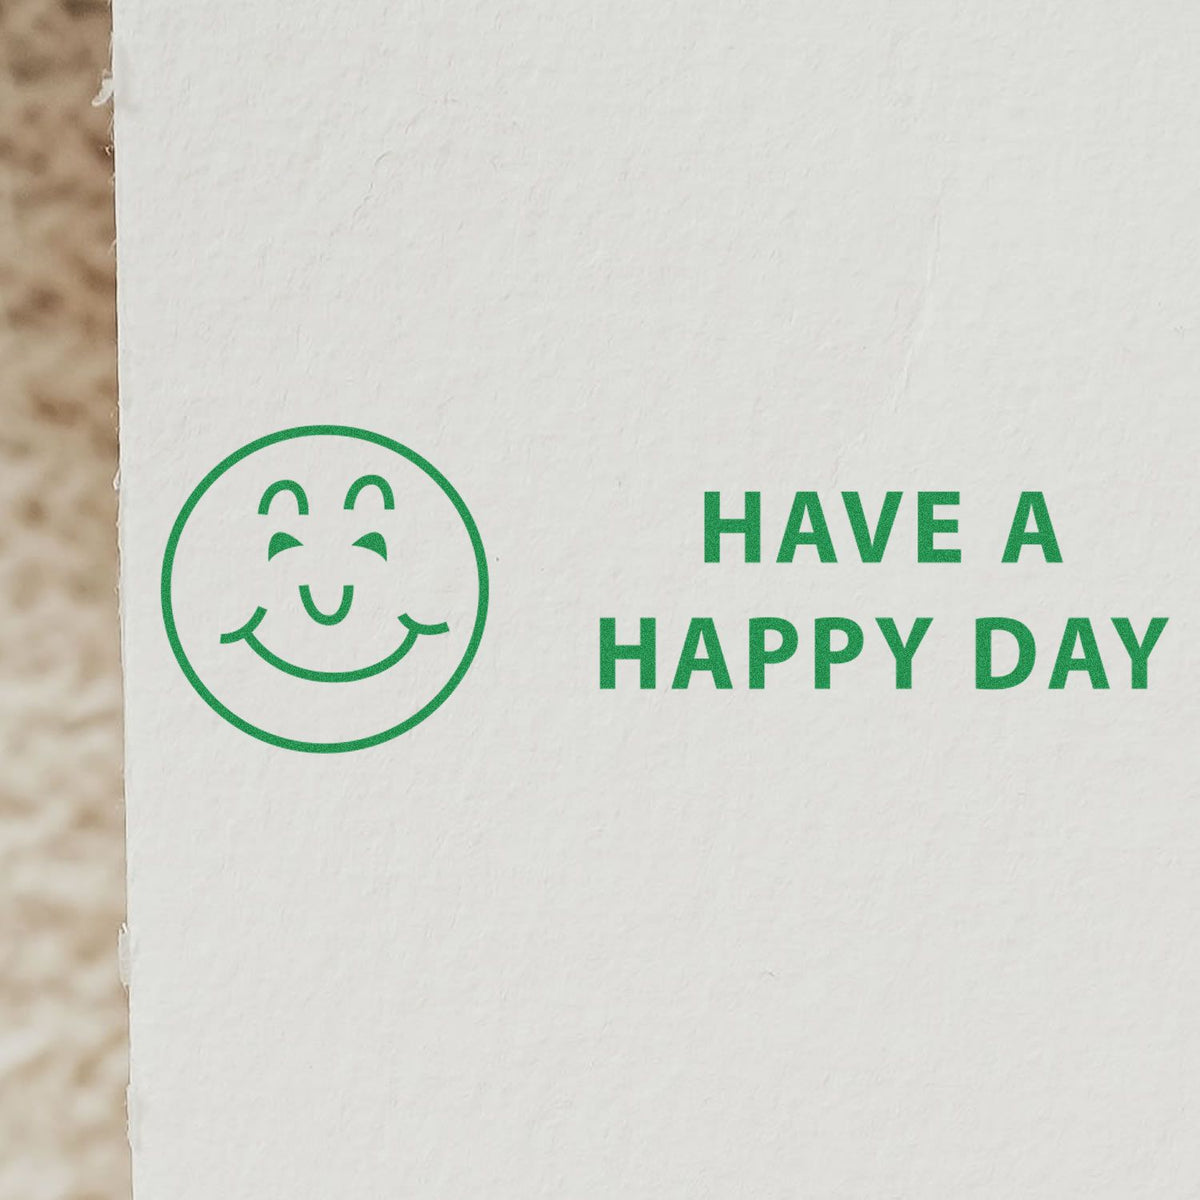 Self-Inking Have a Happy Day Stamp In Use